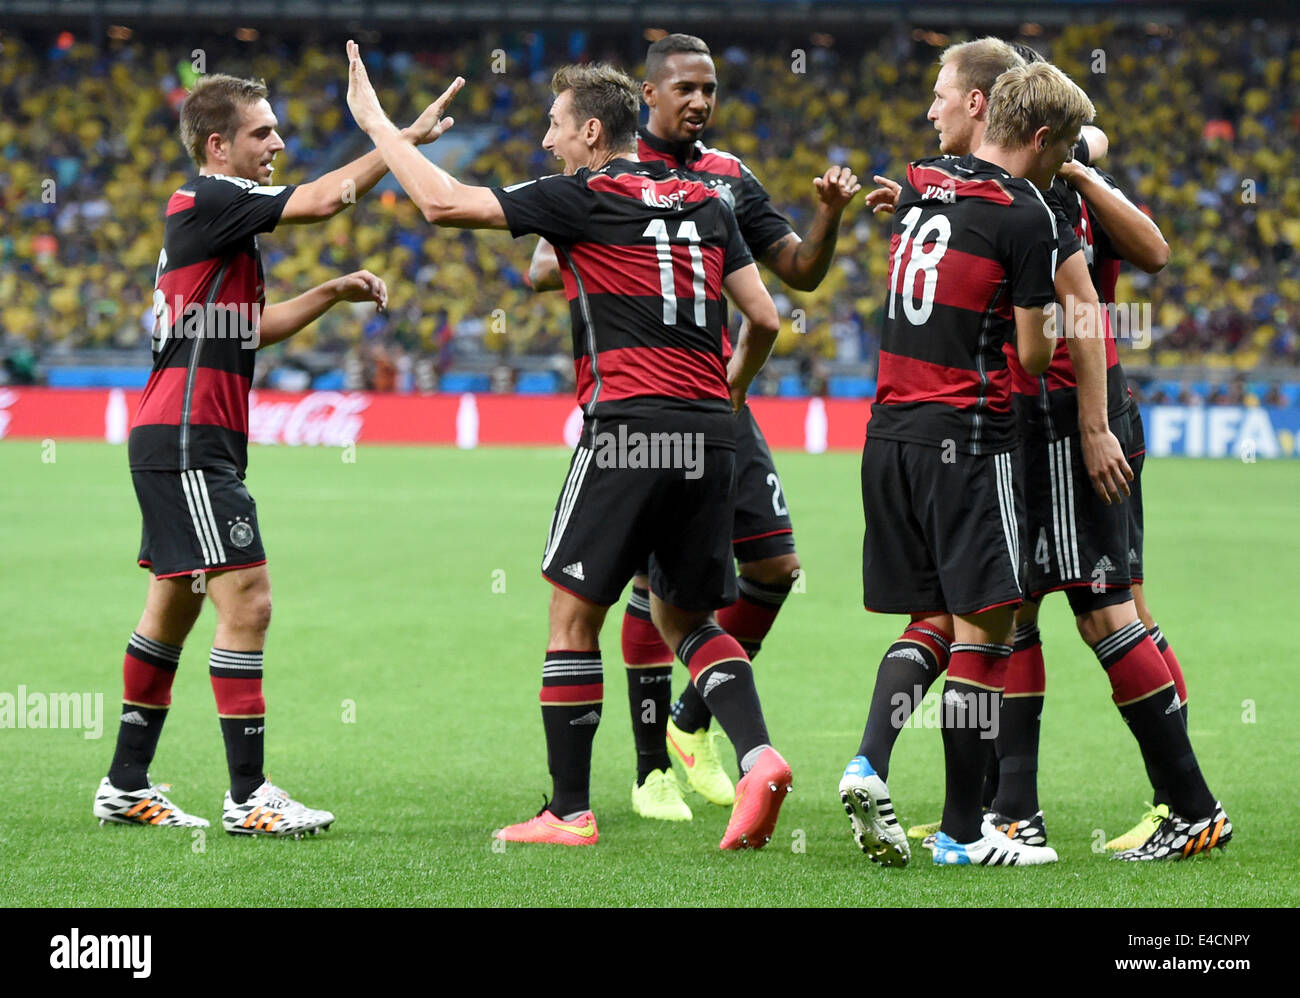 Belo Horizonte, Brazil. 08th July, 2014. Toni Kroos (2-R) of Germany celebrates with his teammmates Philipp Lahm (L) and Miroslav Klose (2-L) after scoring 0-3 goal during the FIFA World Cup 2014 semi-final soccer match between Brazil and Germany at Estadio Mineirao in Belo Horizonte, Brazil, 08 July 2014. Photo: Marcus Brandt/dpa/Alamy Live News Stock Photo